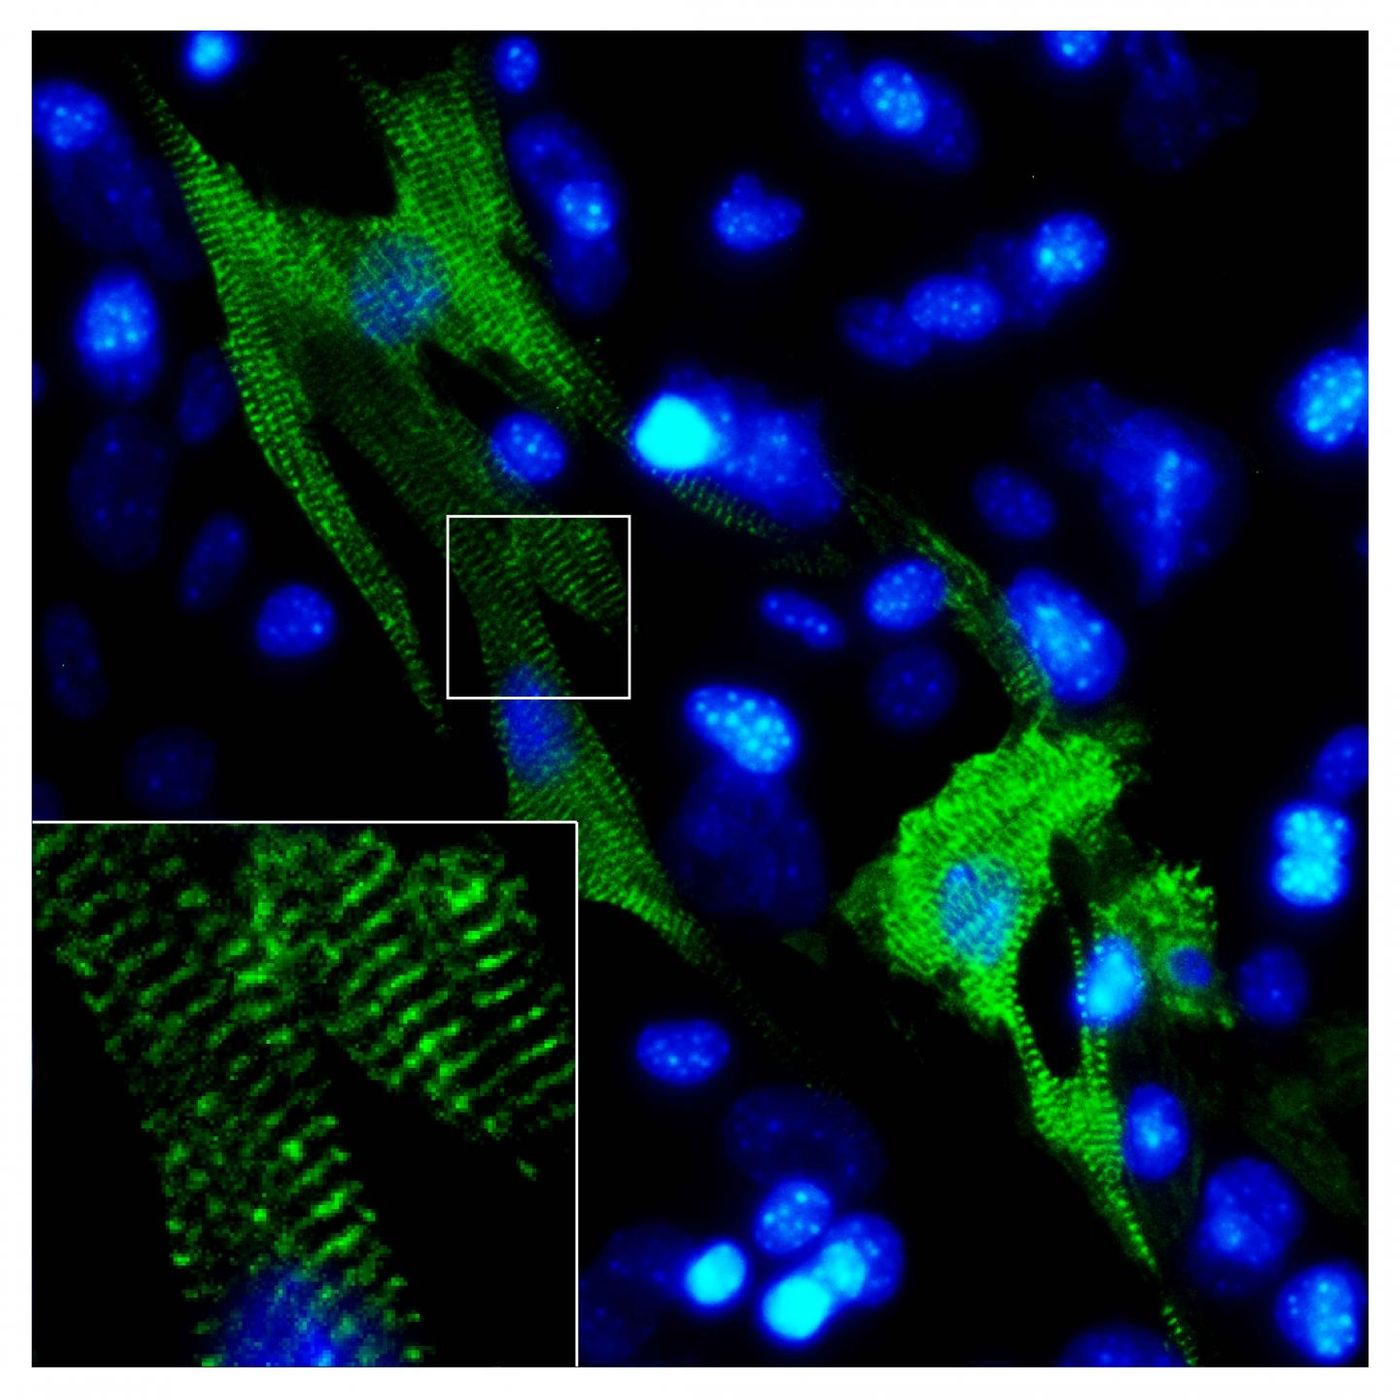 One laboratory method to create healthy heart muscle leads to better organized sarcomeres -- the cells that make heart muscle striated -- stained green here. Credit: Lab of Li Qian, UNC School of Medicine